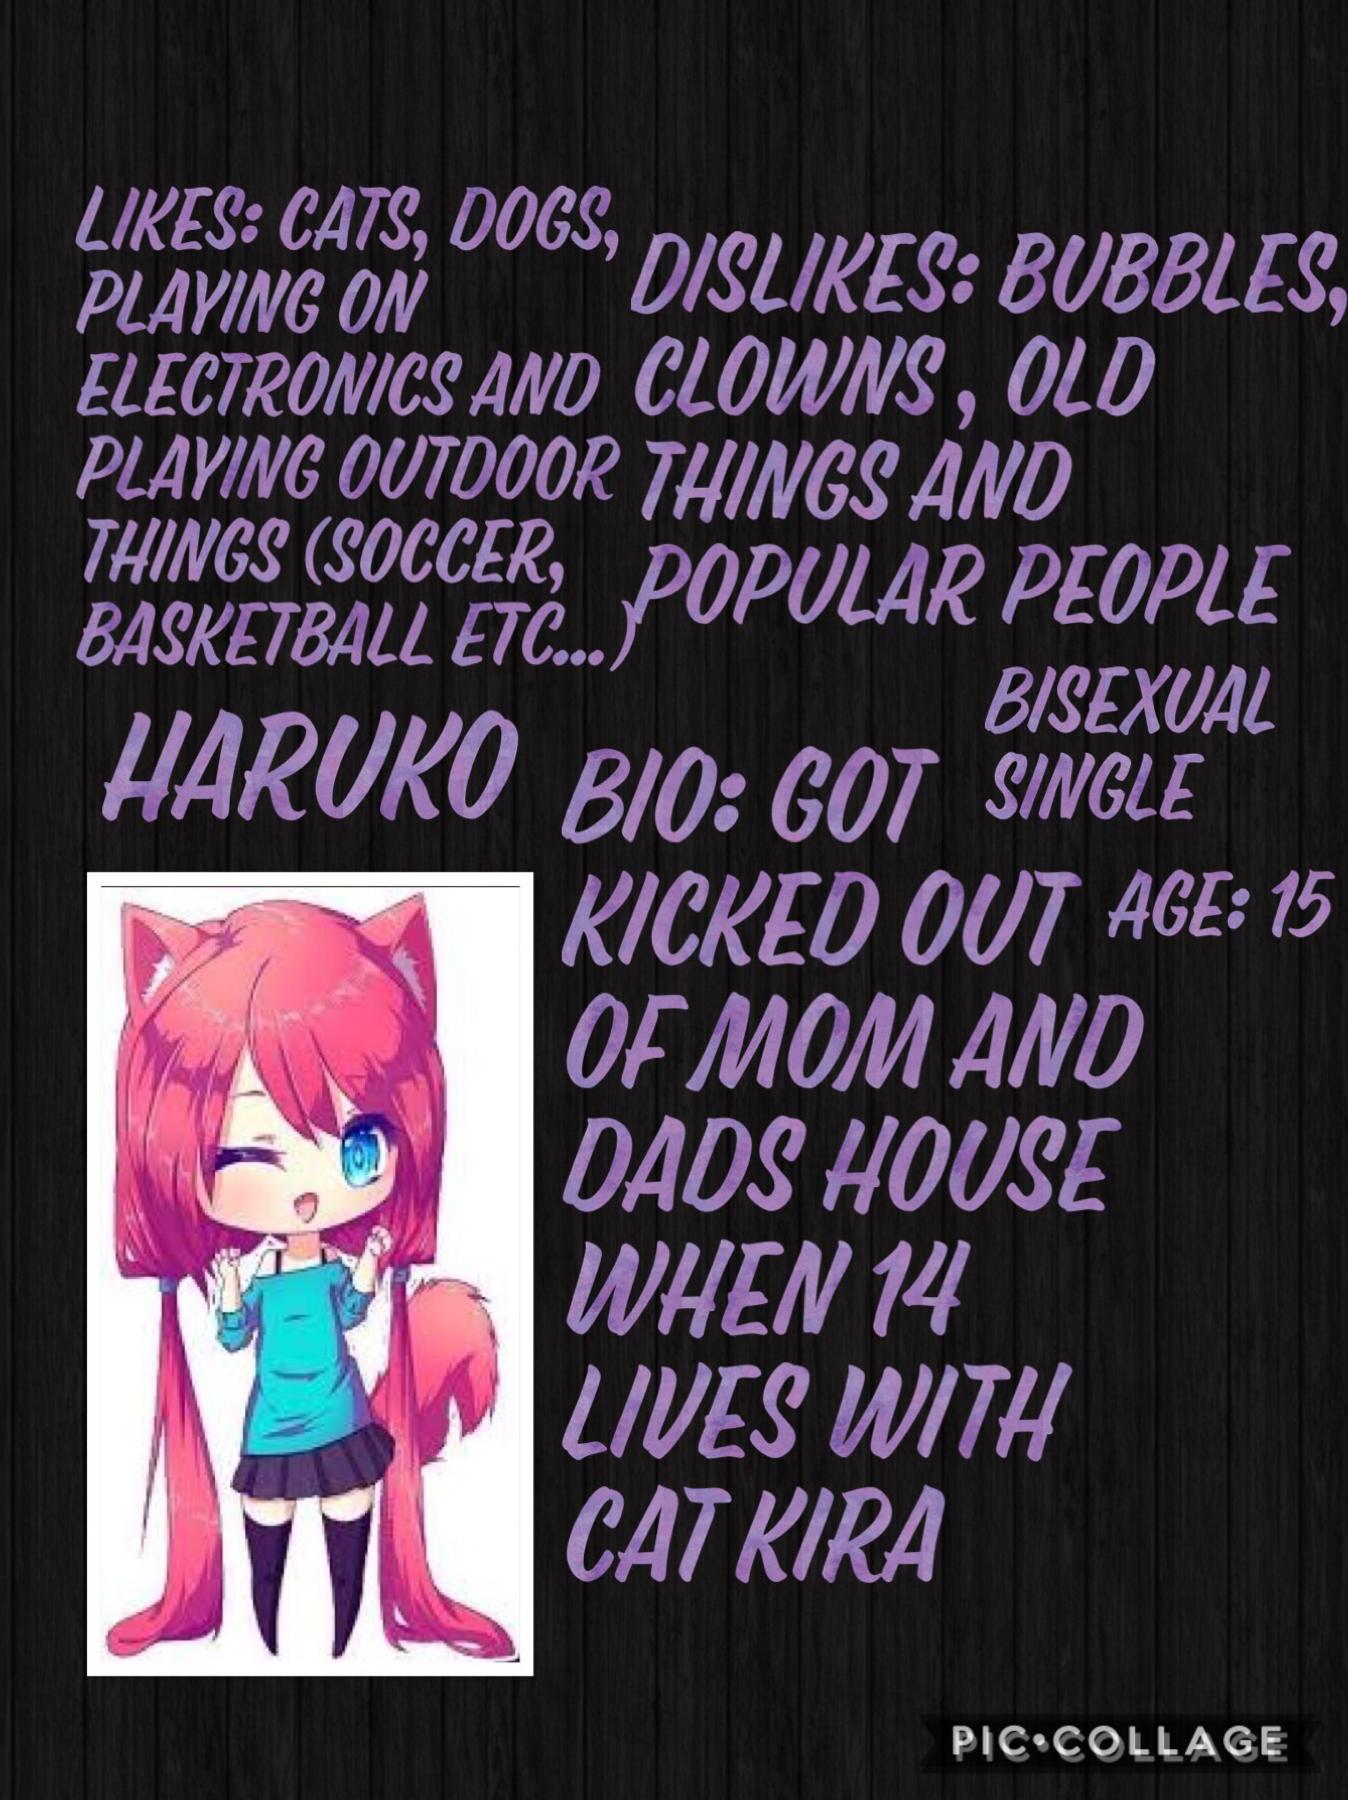 Here’s haruko 
Remix and rp with me? 